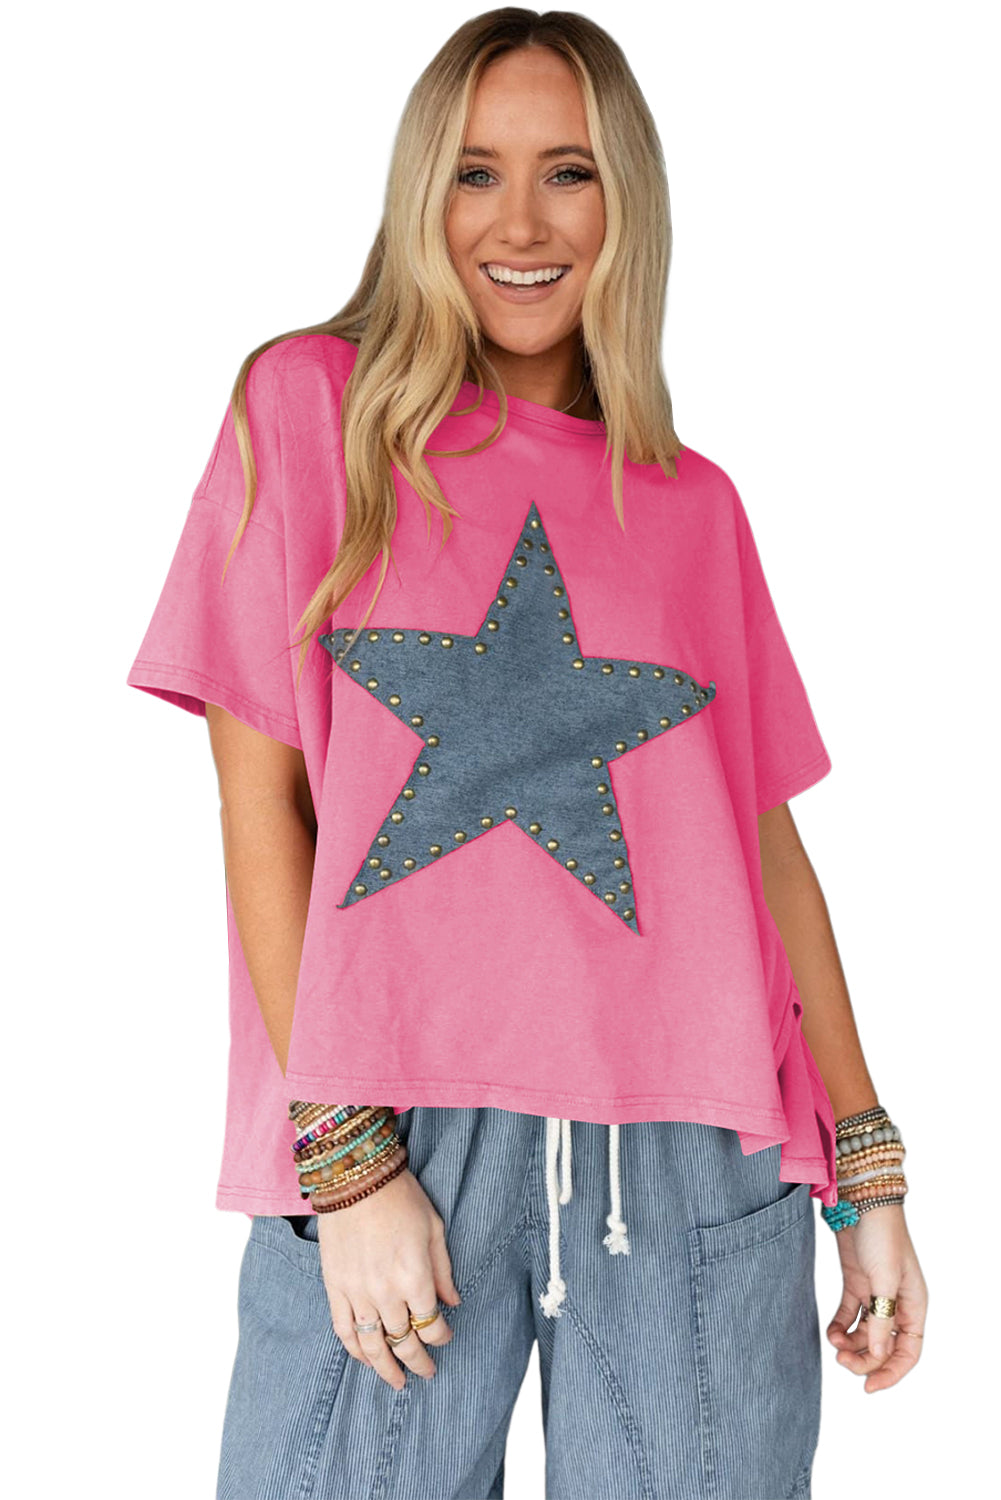 Sachet Pink Mineral Wash Studded Star Patch Graphic High Low Tee Pre Order Tops JT's Designer Fashion